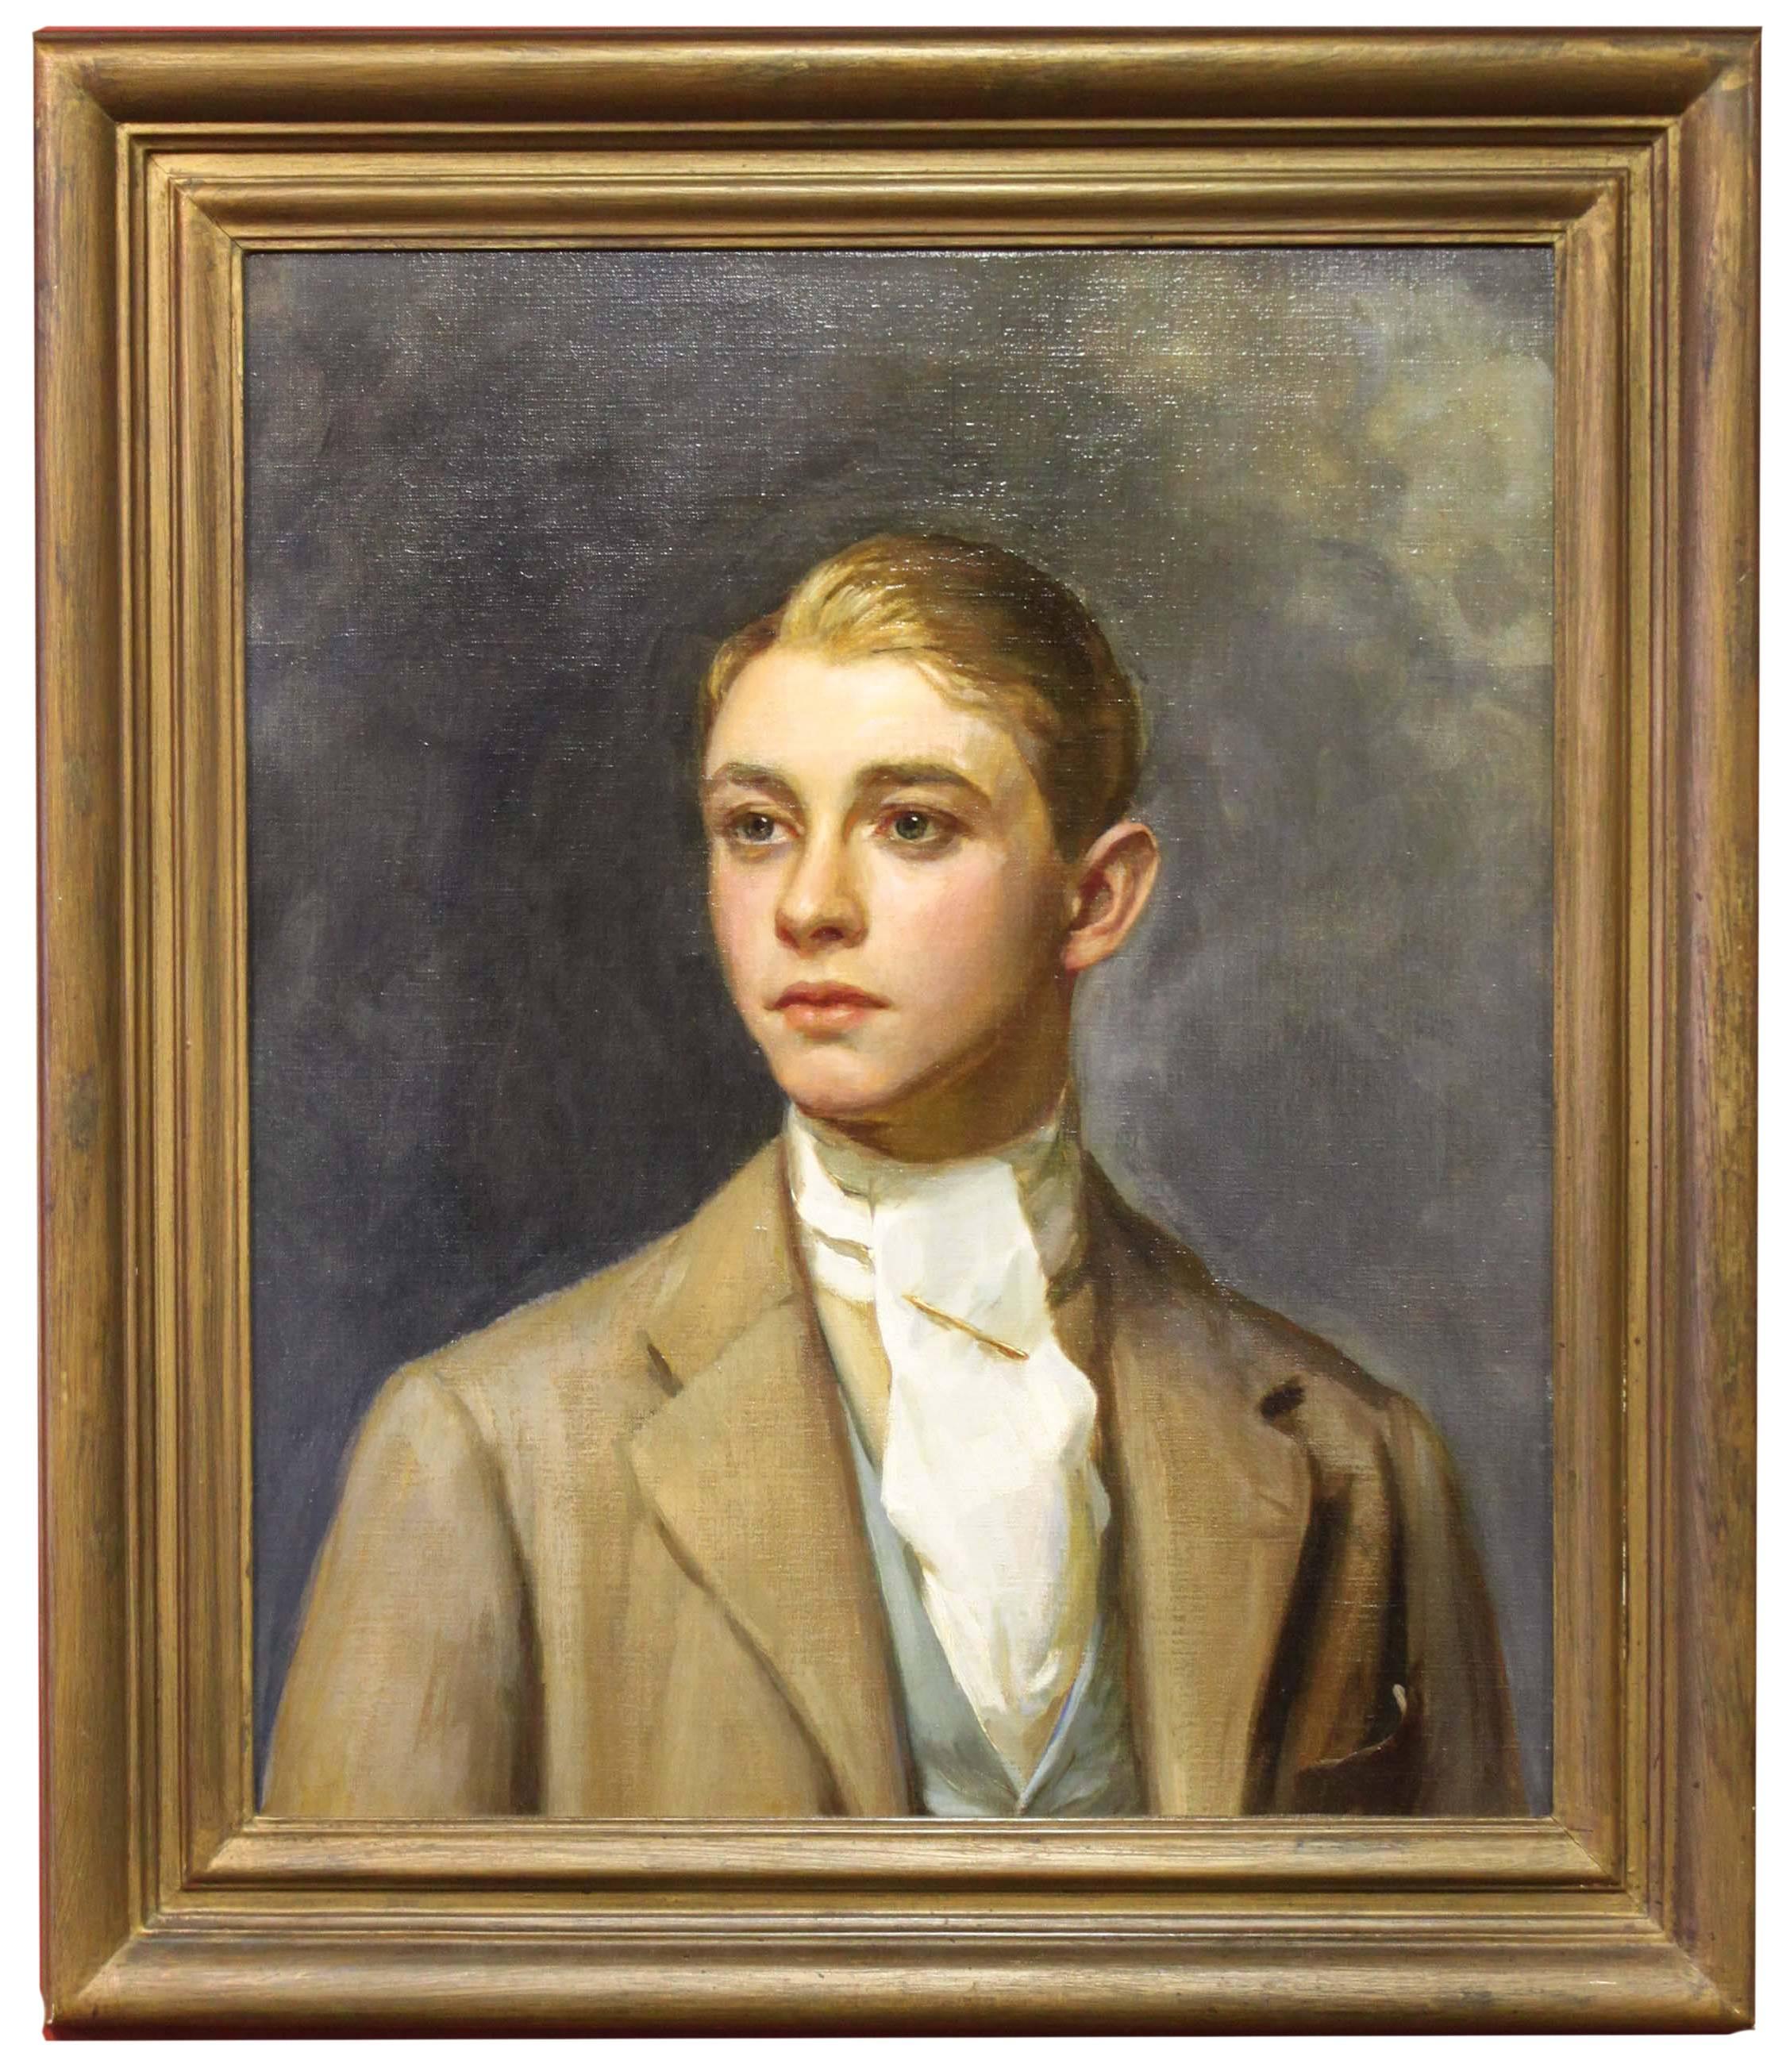 Unknown Portrait Painting - Portrait of a Man, Attributed to Oswald Birley